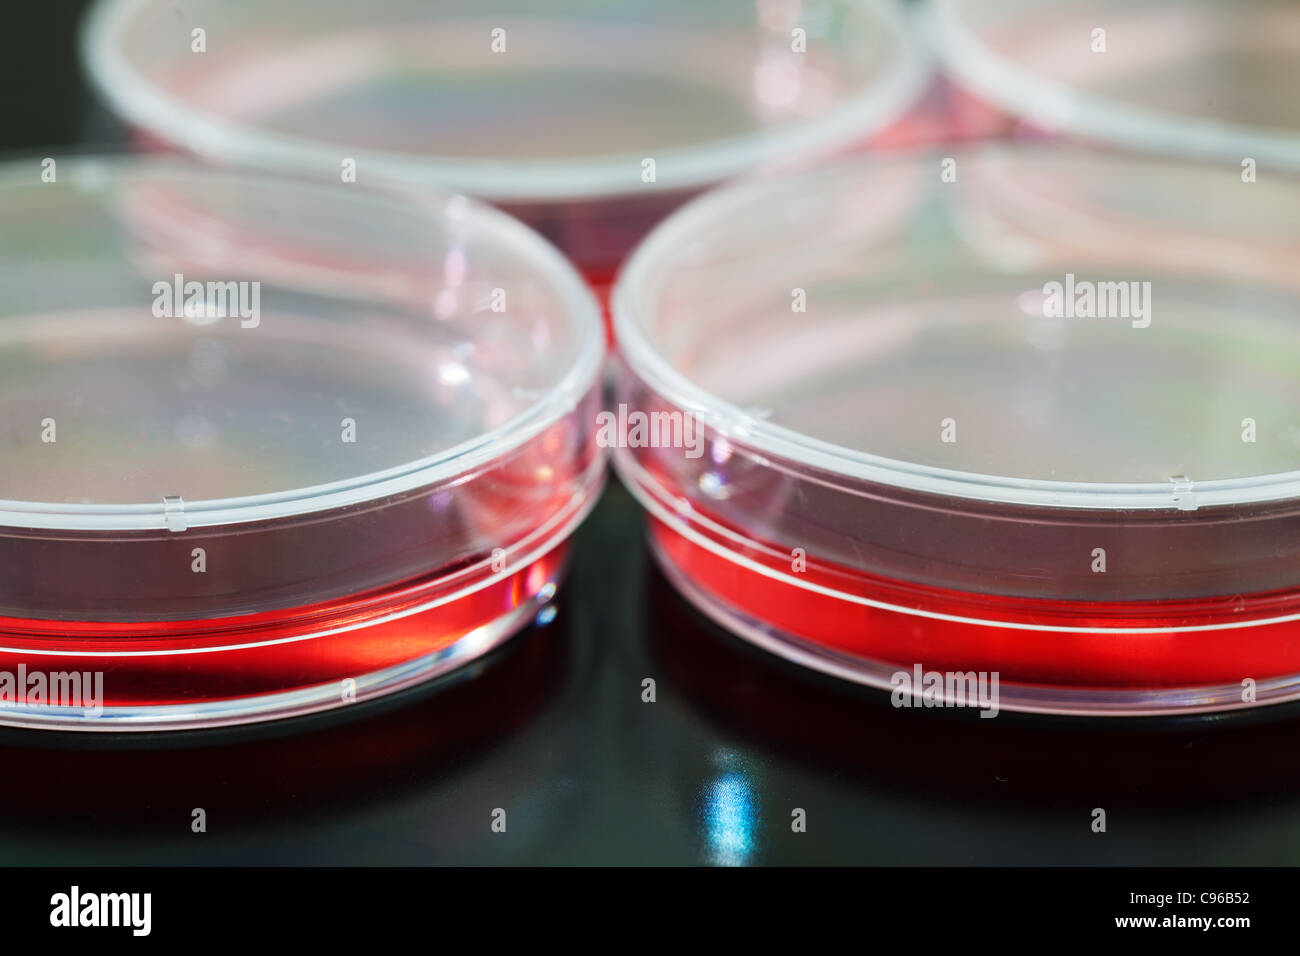 Petri dishes used for eukaryotic cell culture in  solid agar. Stock Photo